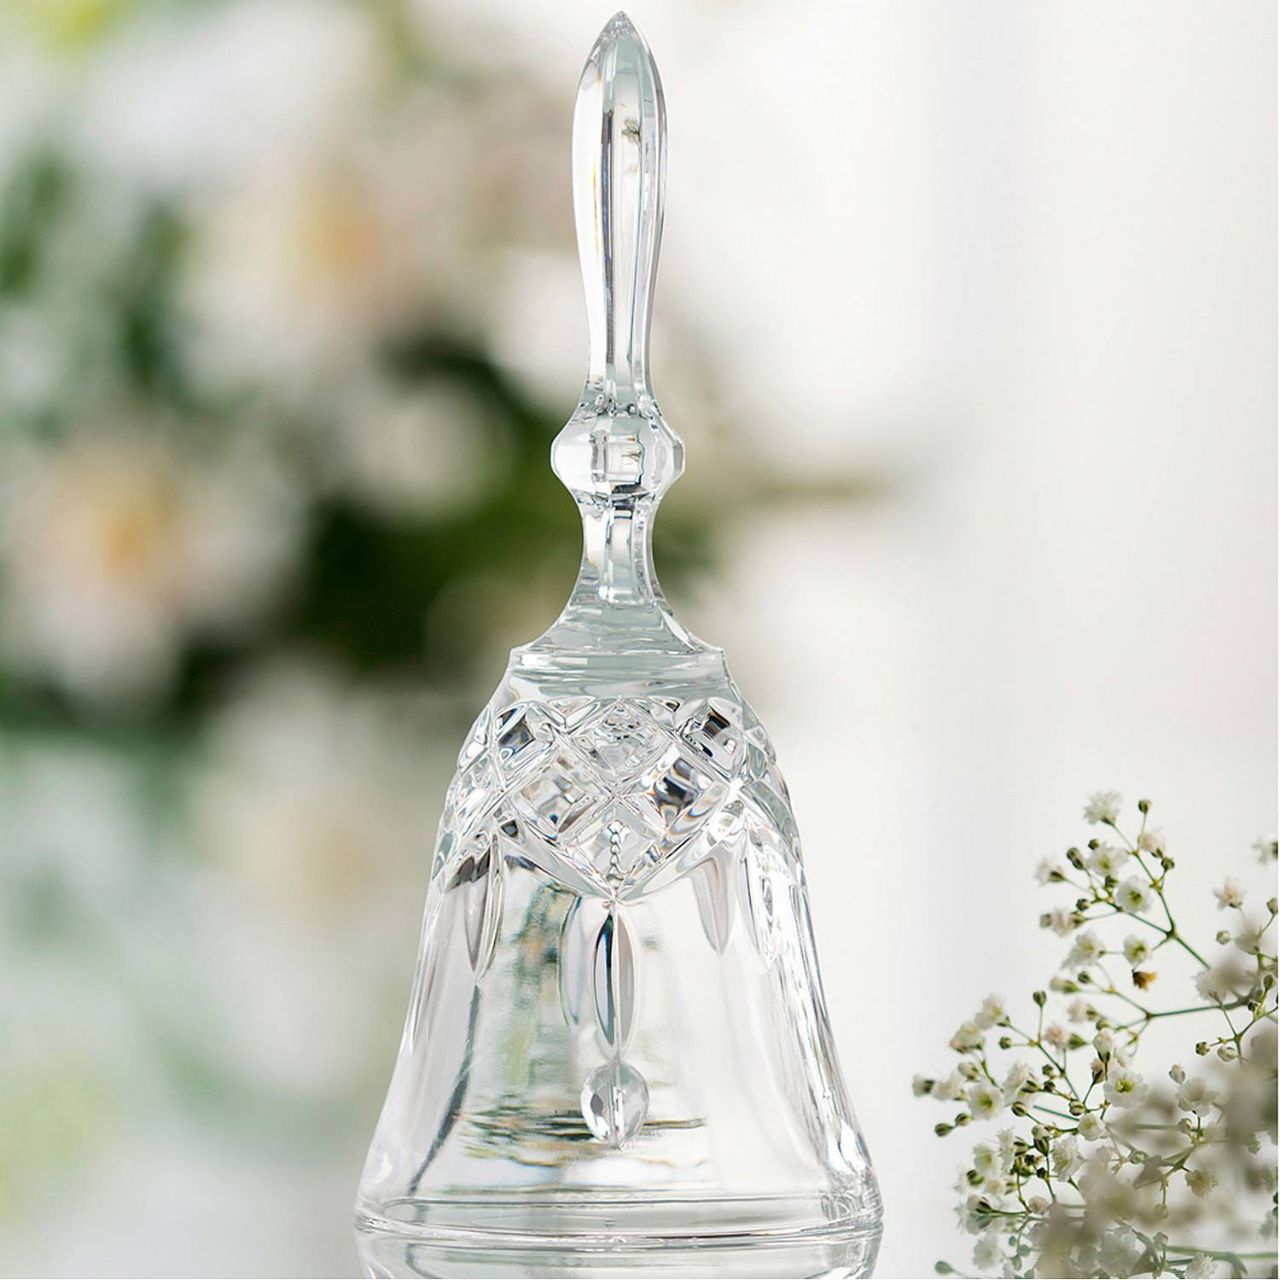 Galway Crystal Longford Make-Up Bell 6"  Named after County Longford , in the midlands of Ireland, a Viking Town literally translated as long port. The longest running Galway pattern, this suite proves popular from generation to generation. The stunning Galway Crystal Longford Make Up Bell is hand etched and perfect for the dressing table. A beautiful keepsake.